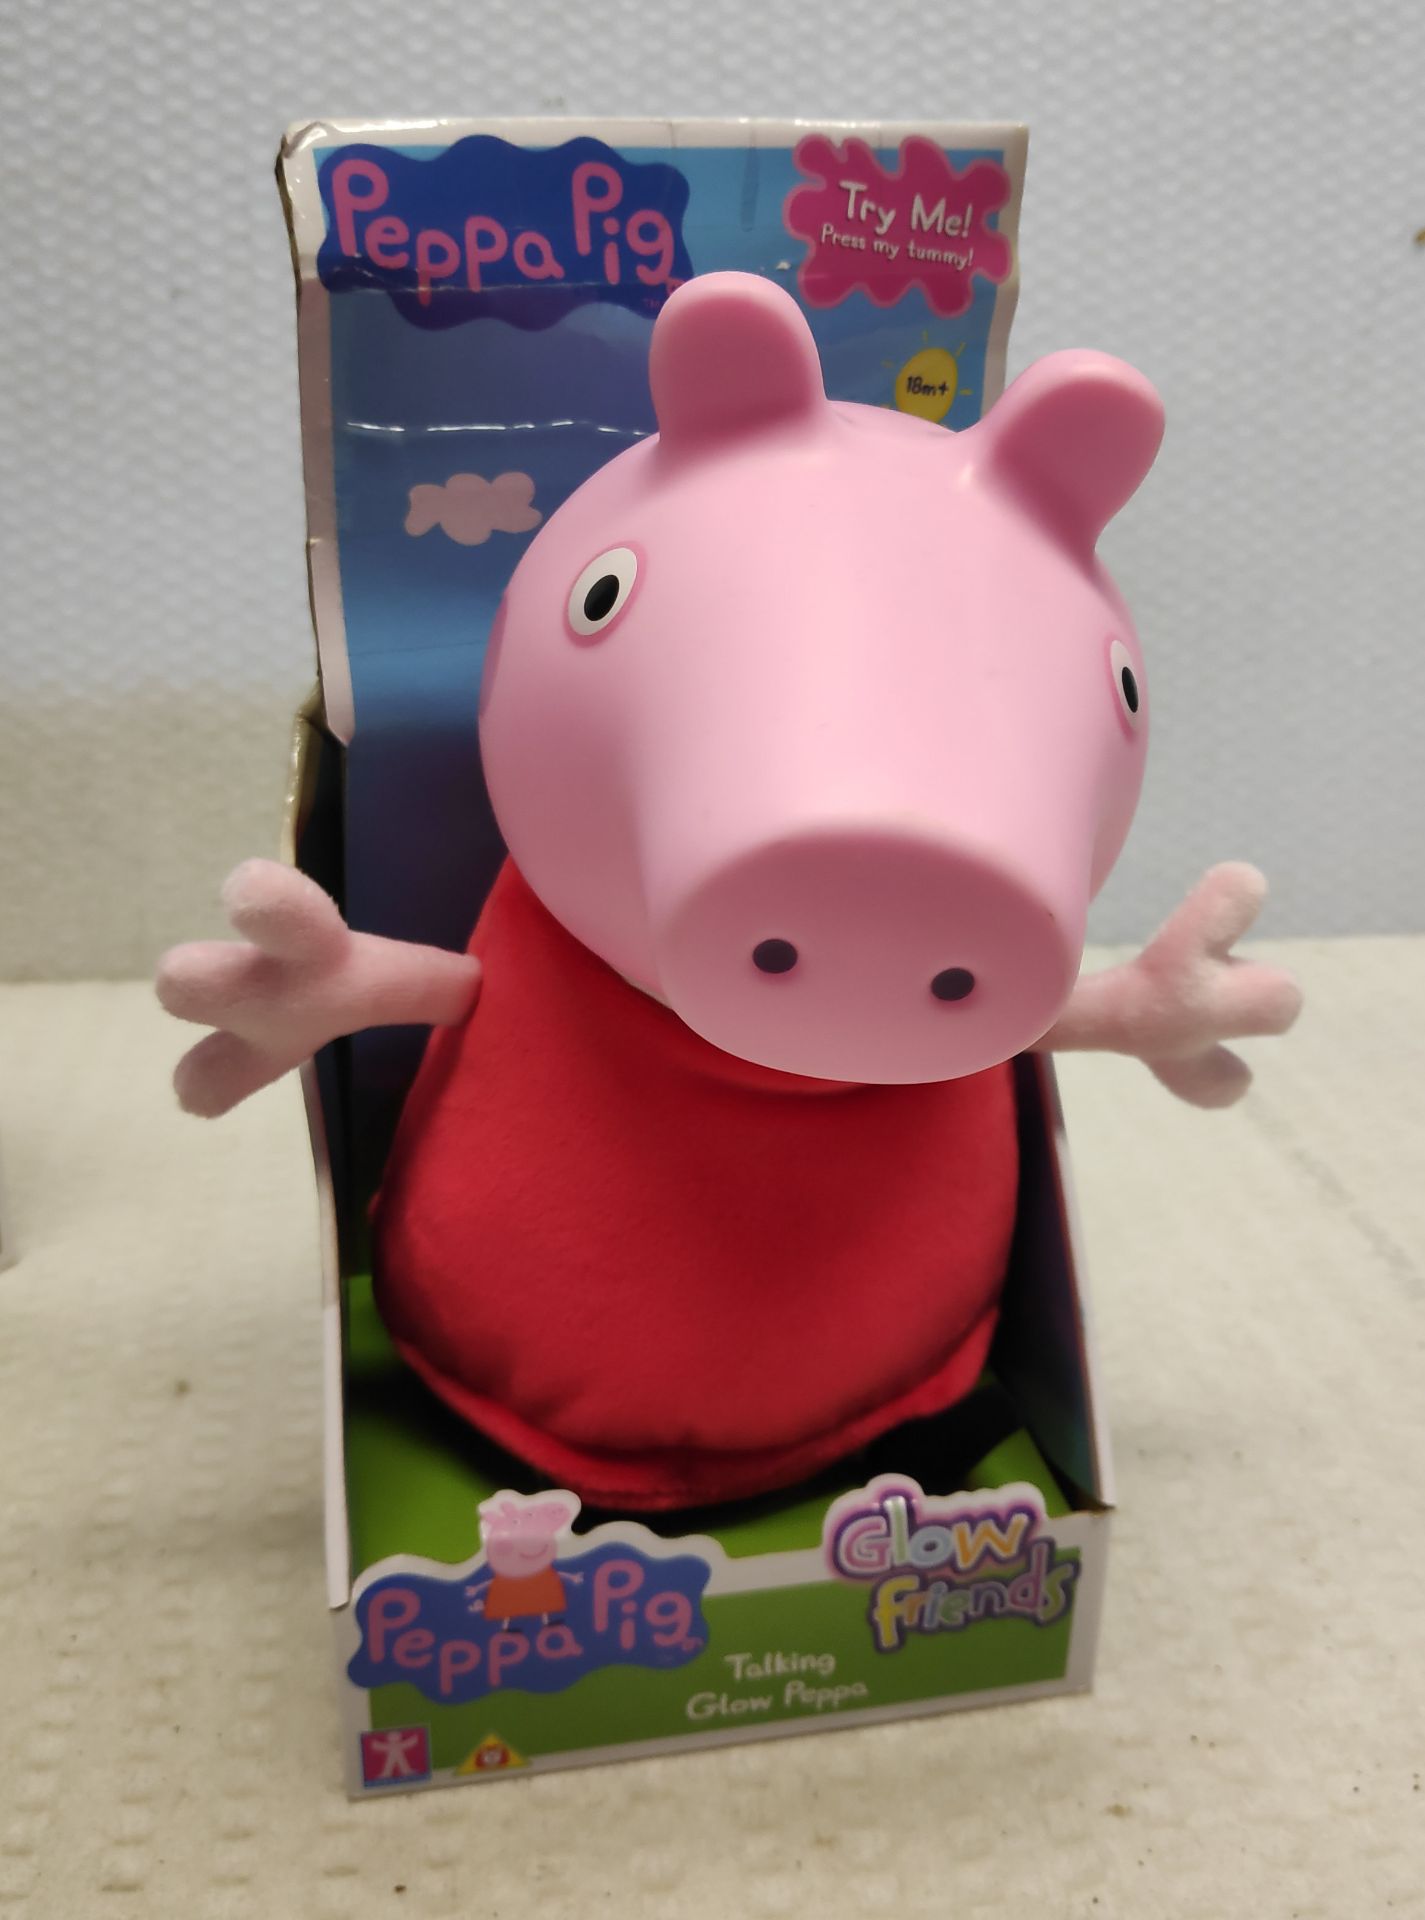 2 x Peppa Pig Toys - Glow Friends Peppa and Air Peppa Jet - New/Boxed - Image 5 of 7